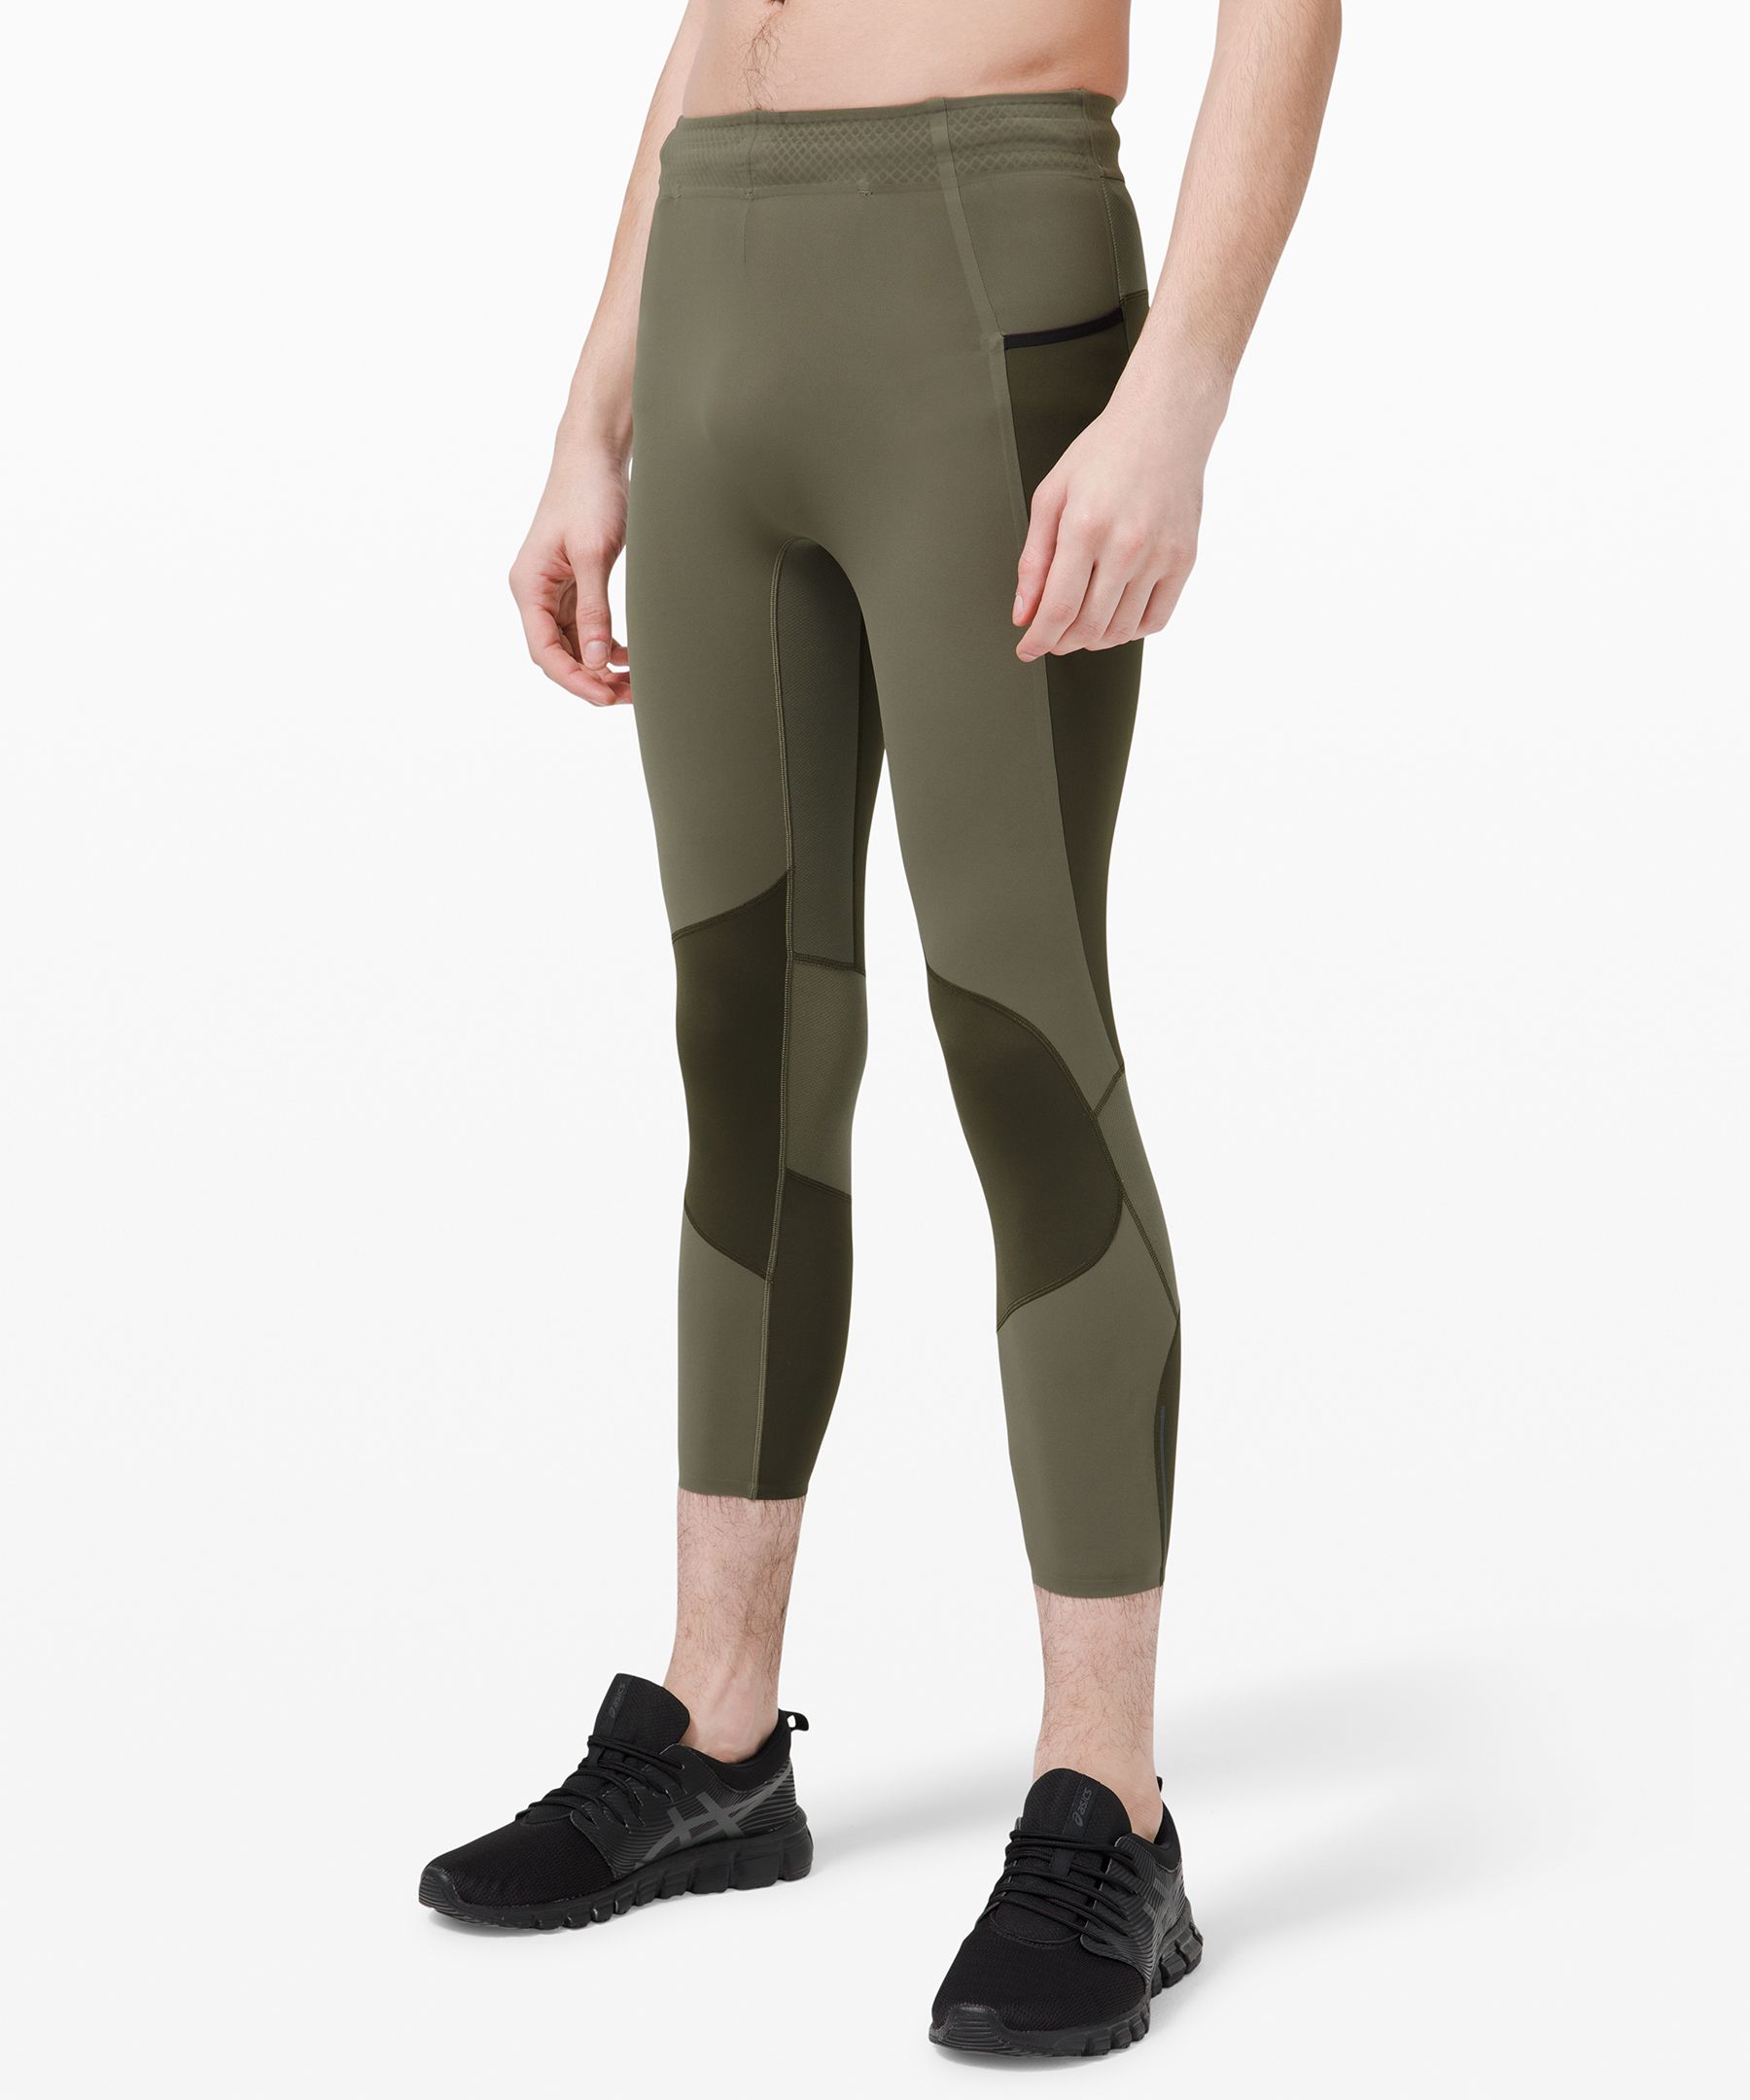 Lululemon Surge Tights Nulux 22 In Army Green/dark Olive